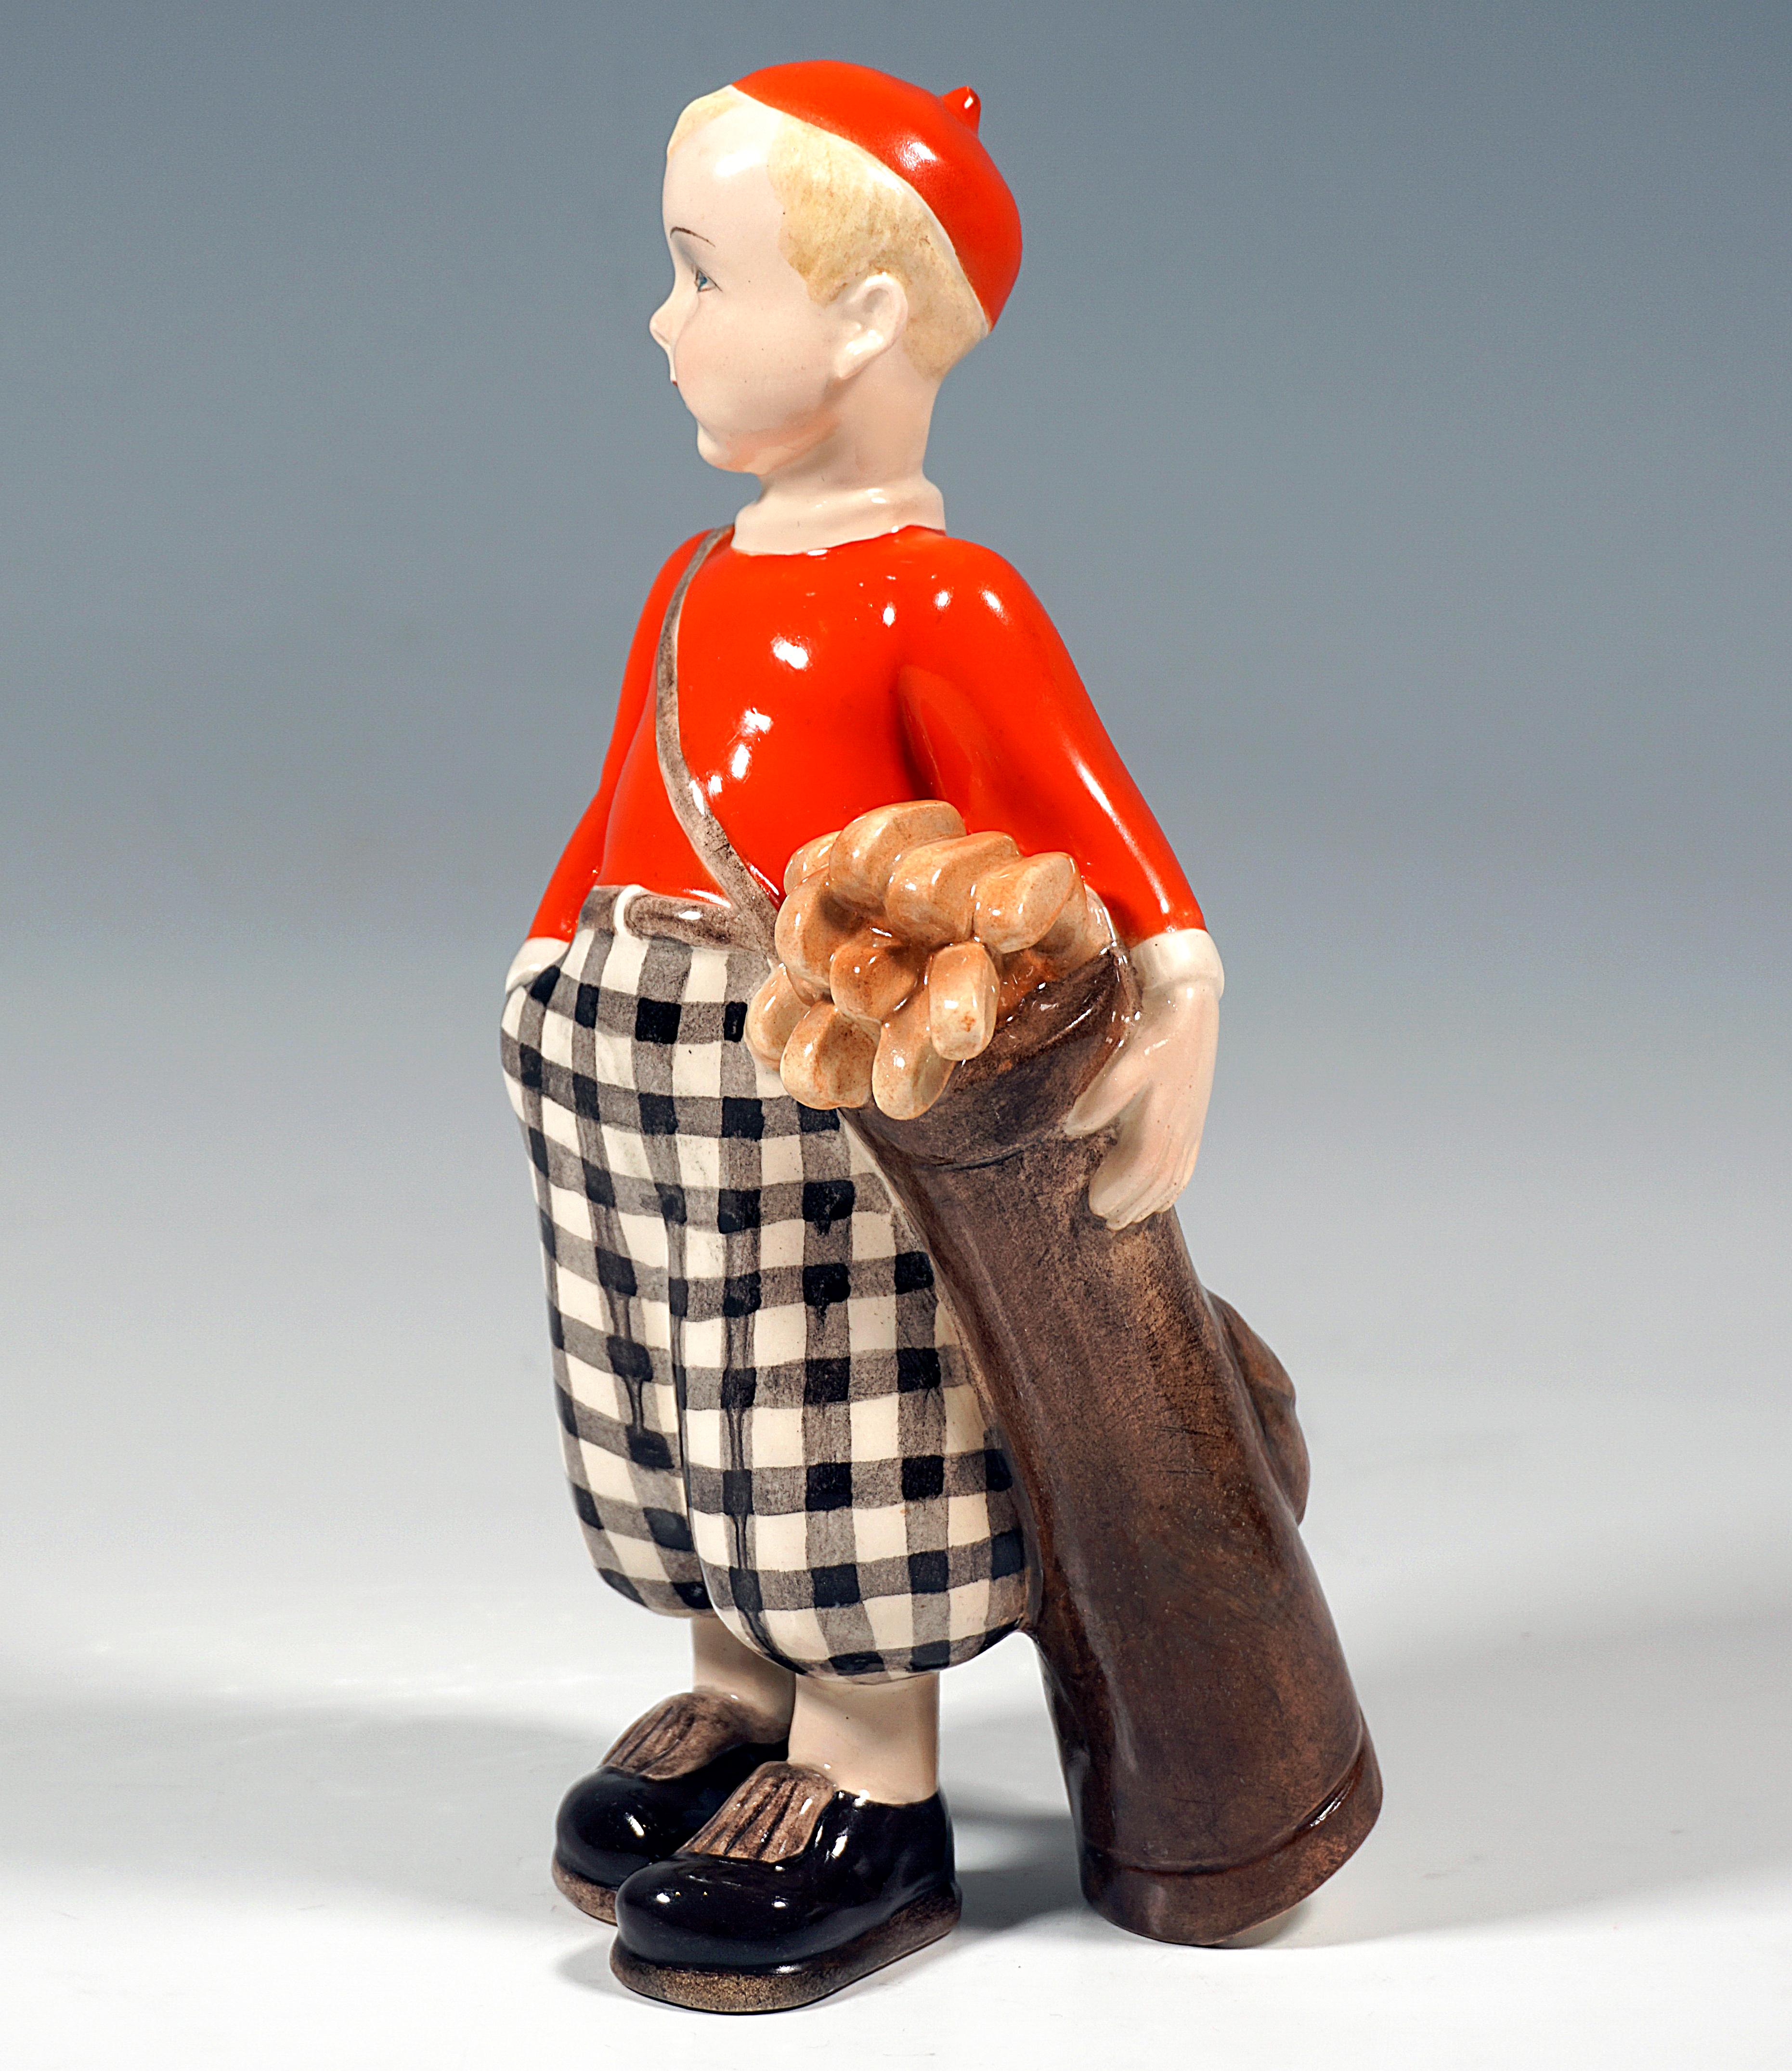 Boy with red cap, red jumper and checked harem pants standing, facing right, right hand in trouser pocket, carrying golf bag full of clubs and clasping it with his left hand.

Designer:
Claire/Klára Herczeg/Weiss (1906 - 1997)
Sculptor,